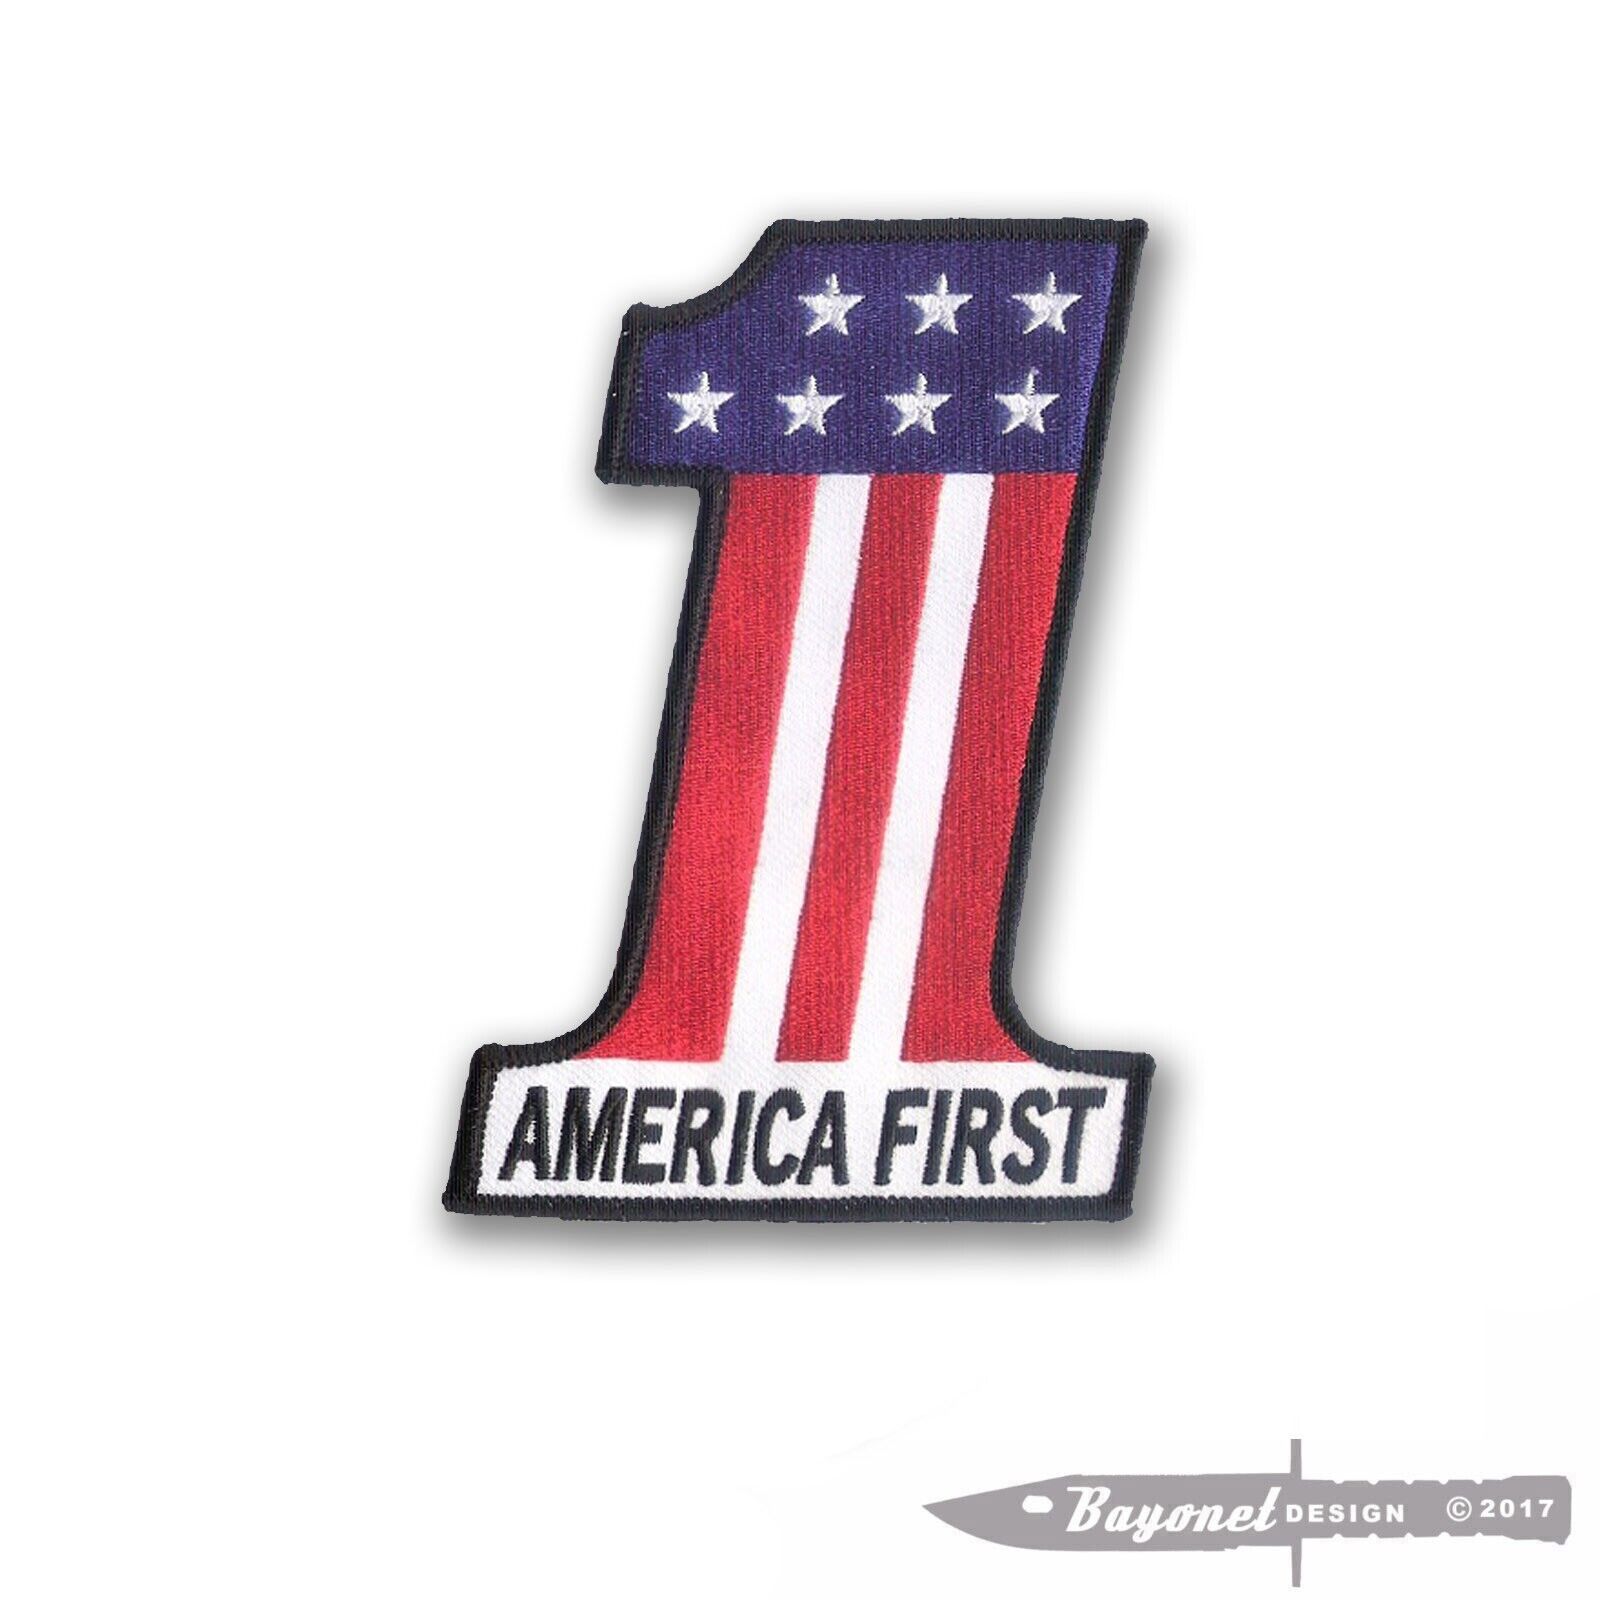 USA - America First - Embroidered Patch - We the People - Patriots - Wax Backing